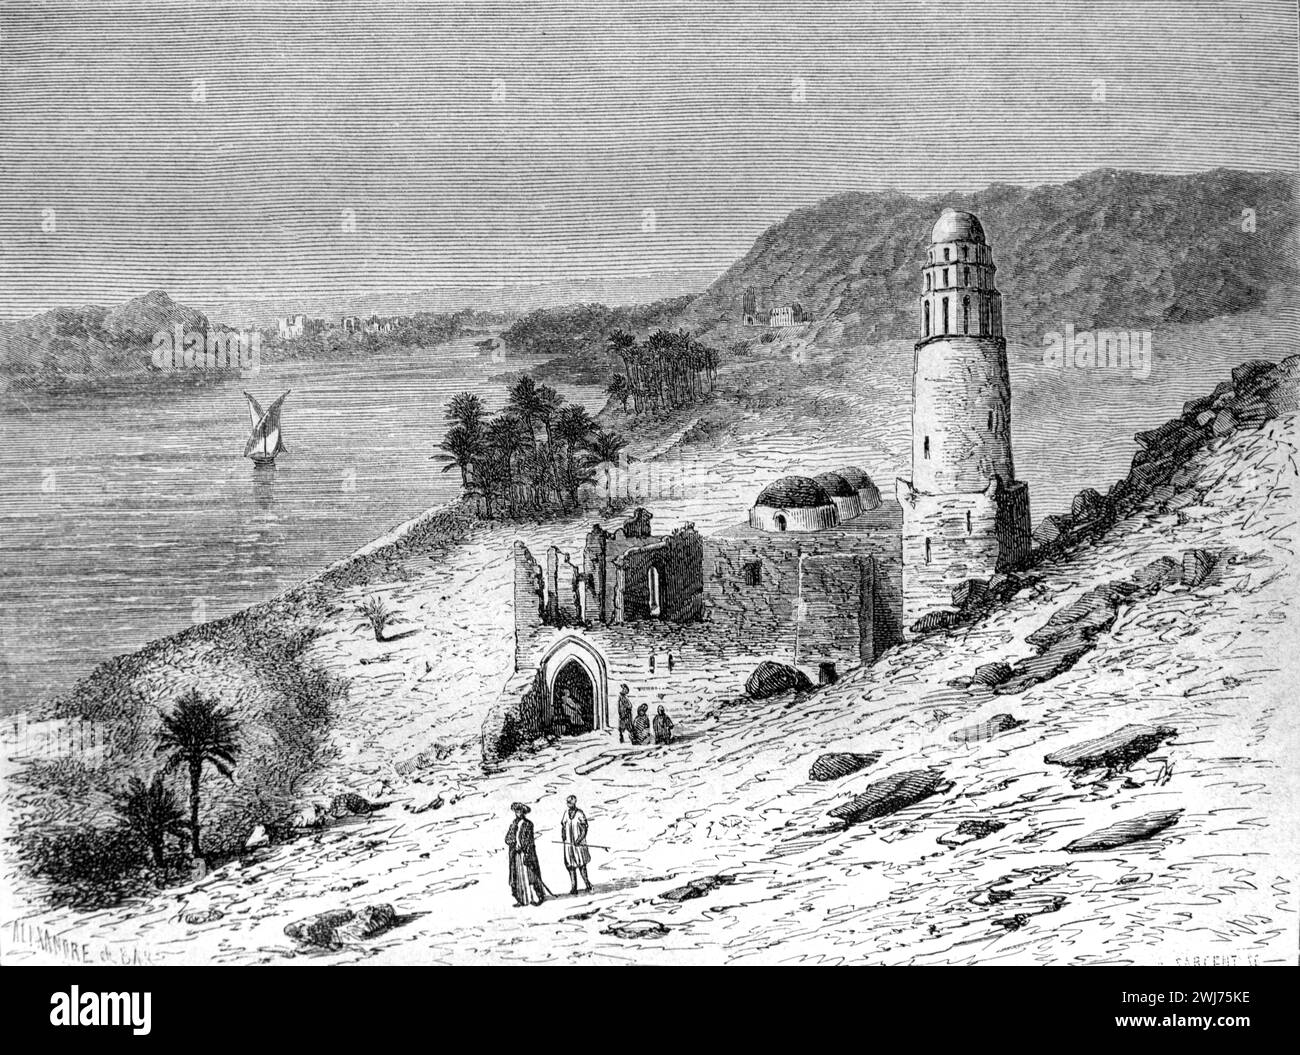 Ruined Mosque & Minaret Opposite Philae and River Nile, Aswan, Nubia, Egypt. Vintage or Historic Engraving or Illustration 1863 Stock Photo